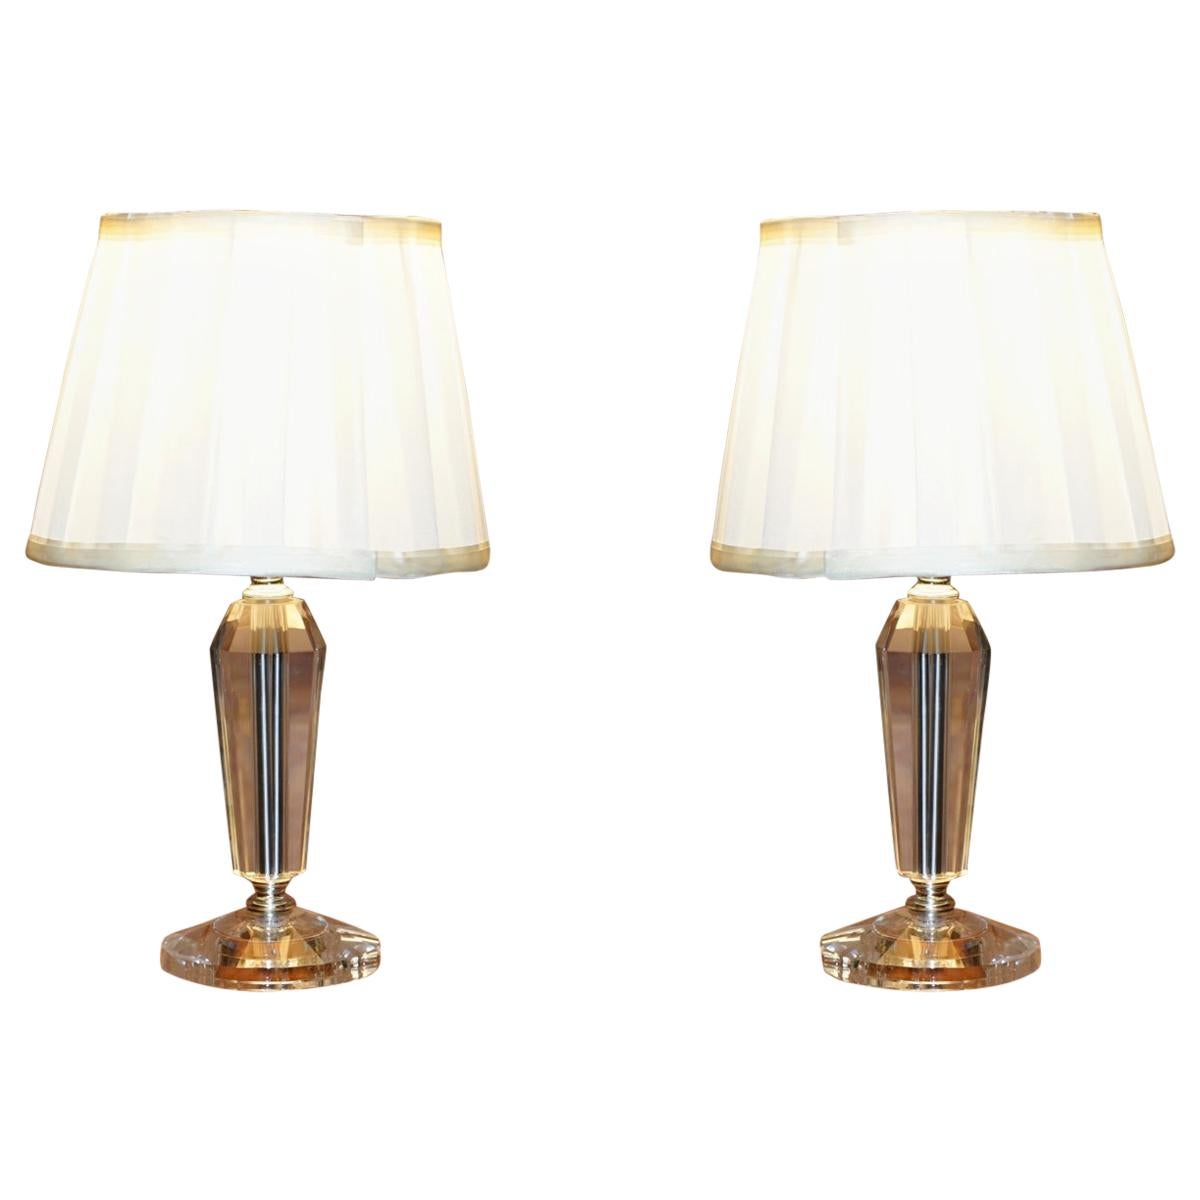 Lovely Pair of Cut Glass Small Table Lamps with Original Shades in Nos Condition